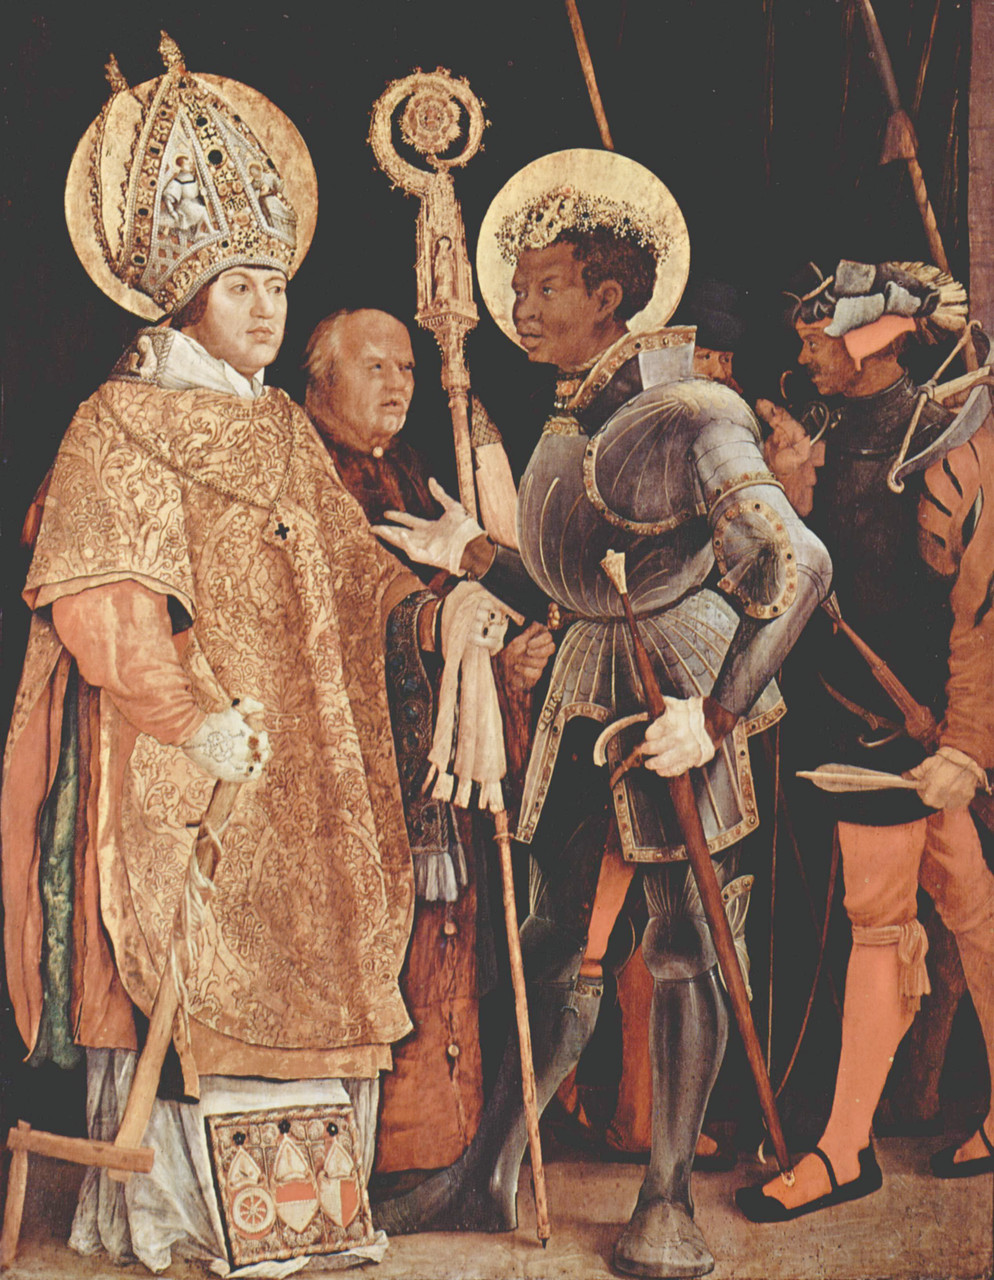 SOLDIER FOR THE FAITH: A 16th-century painting depicts St. Maurice, an Egyptian-born Roman soldier and the first black saint, meeting St. Erasmus, a bishop of the early Church. St. Maurice is among the early Church figures whose legacy will be celebrated during Black Catholic History Month in November.